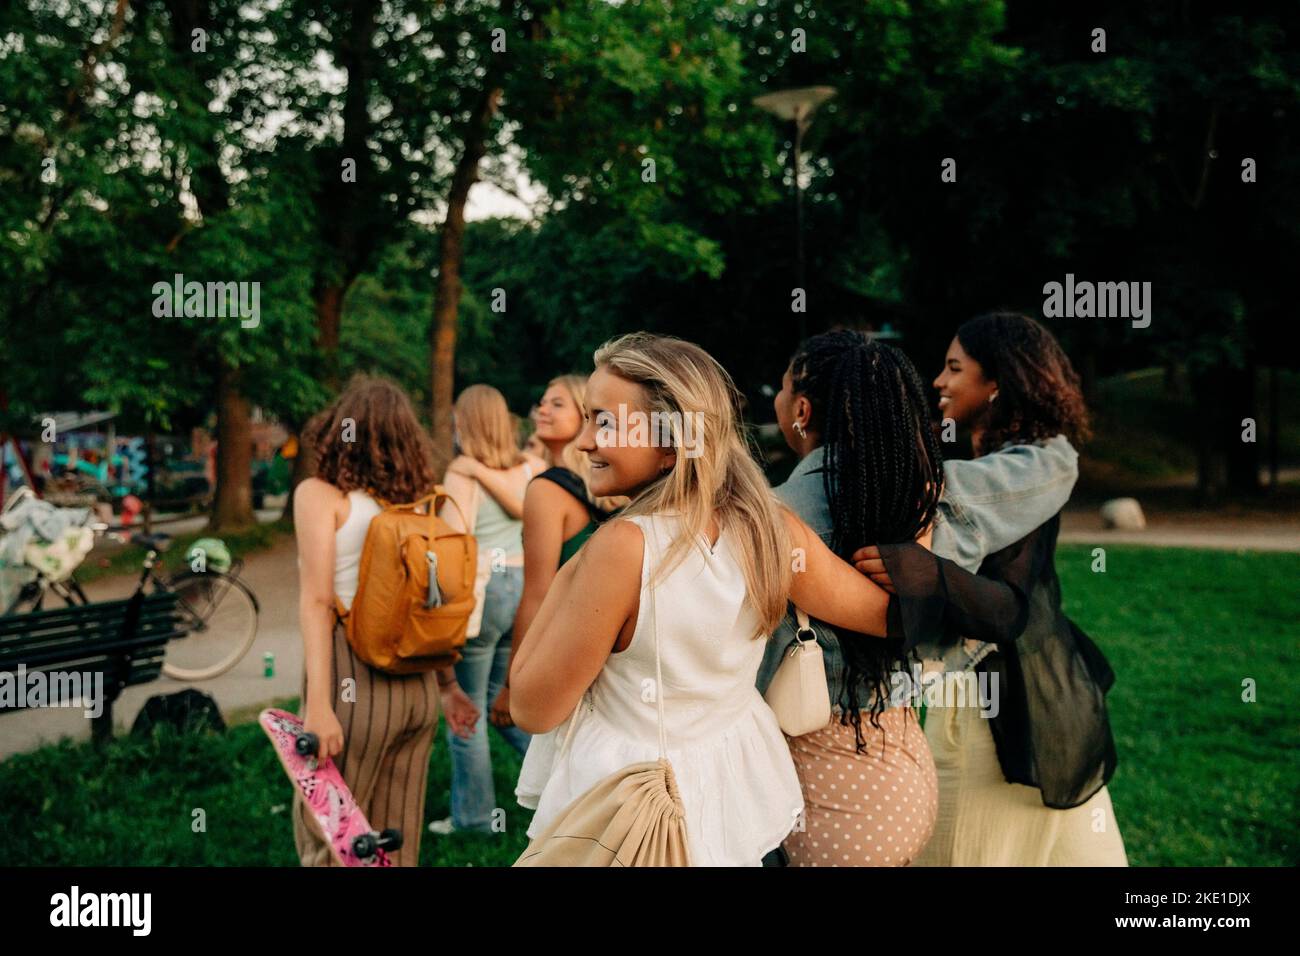 Smiling blond teenage girl walking with female friends at park Stock Photo